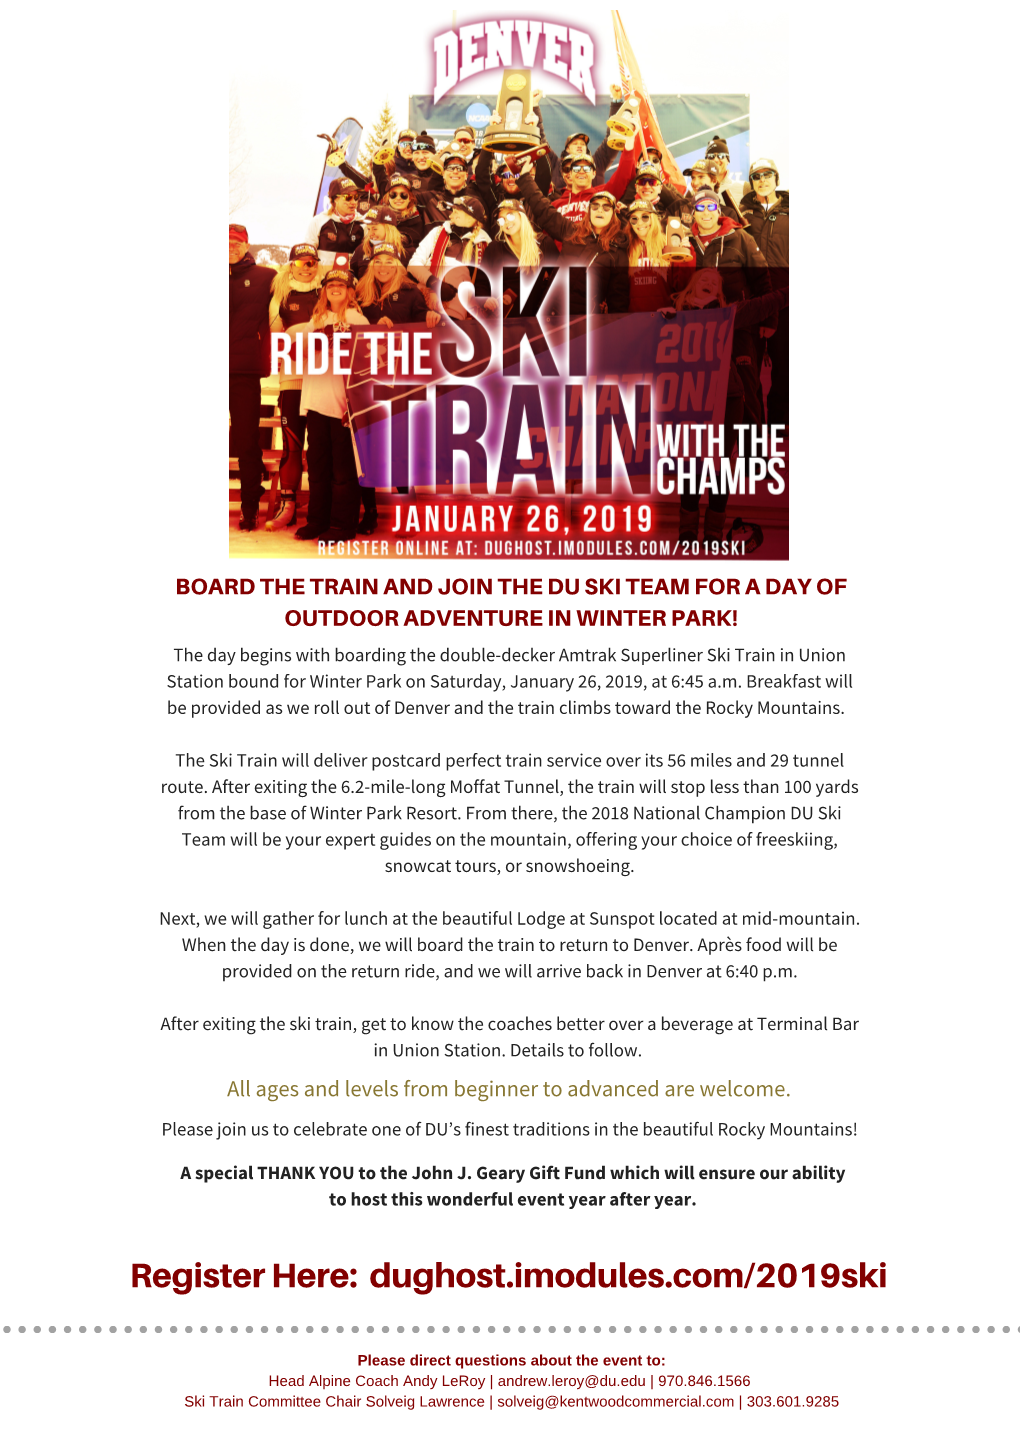 Copy of 2019 Ski Train with out Register Here